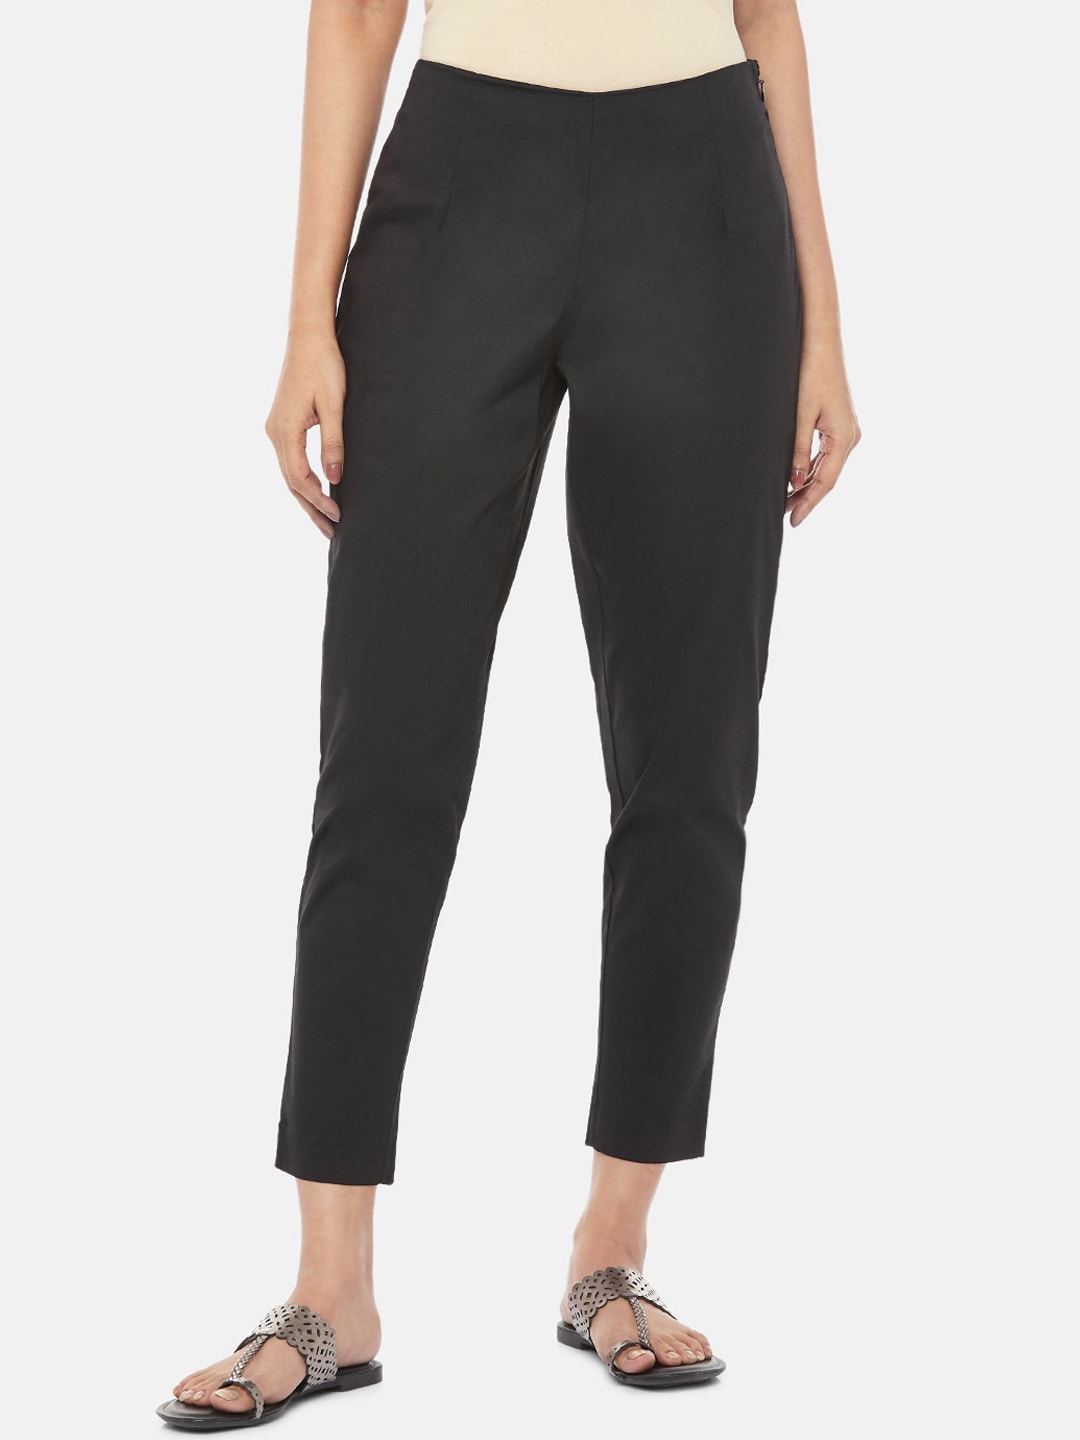 RANGMANCH BY PANTALOONS Women Black Regular Fit Solid Cigarette Trousers Price in India